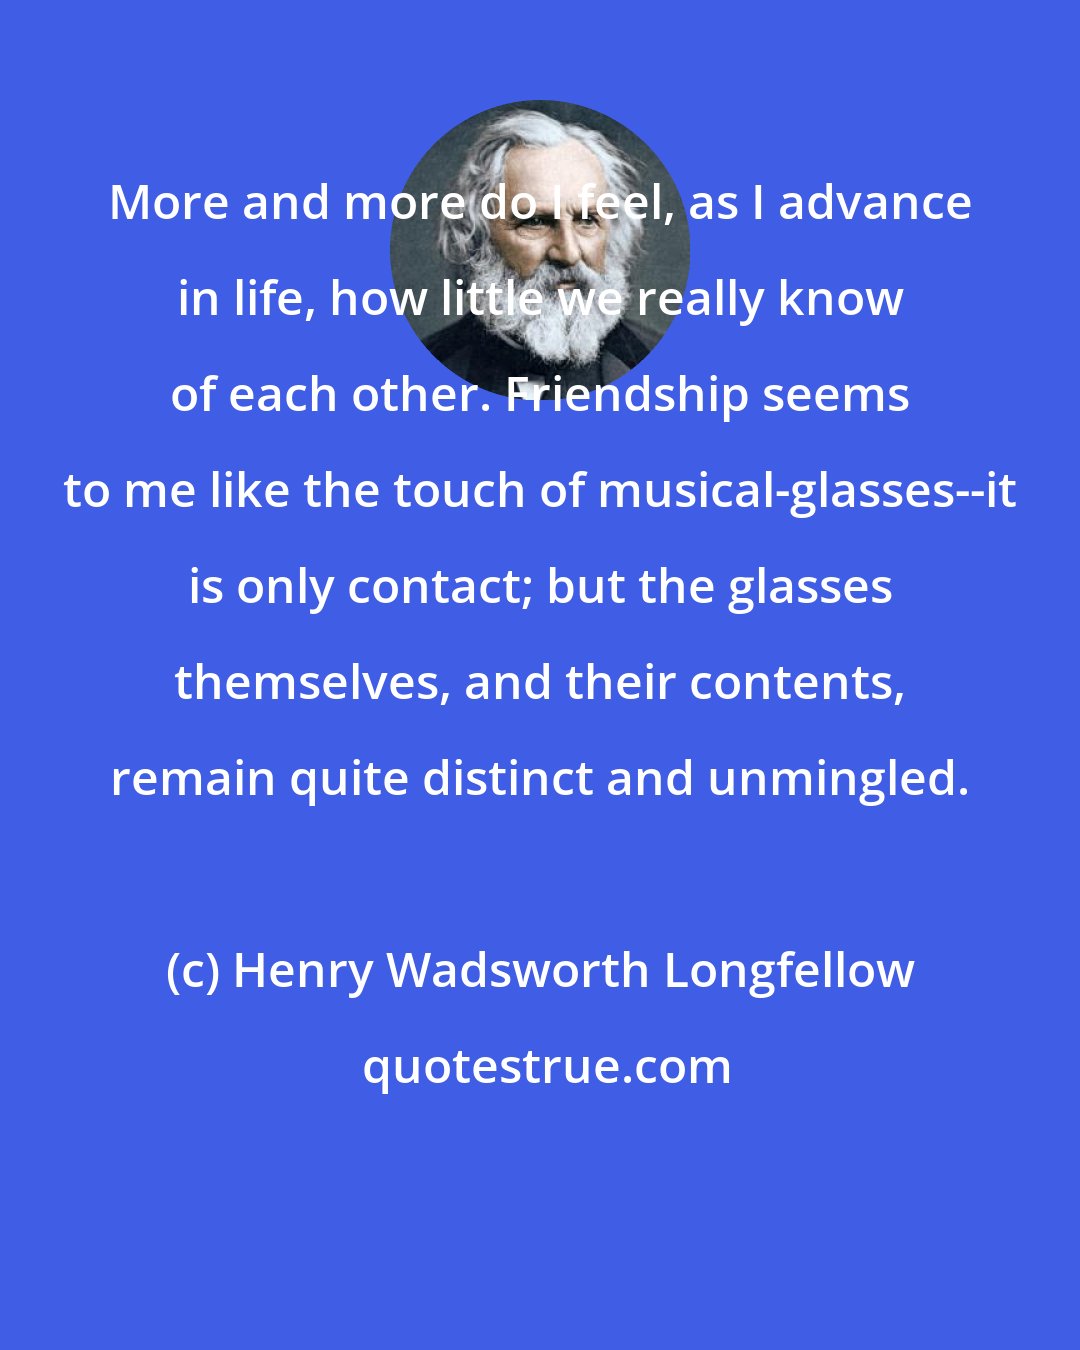 Henry Wadsworth Longfellow: More and more do I feel, as I advance in life, how little we really know of each other. Friendship seems to me like the touch of musical-glasses--it is only contact; but the glasses themselves, and their contents, remain quite distinct and unmingled.